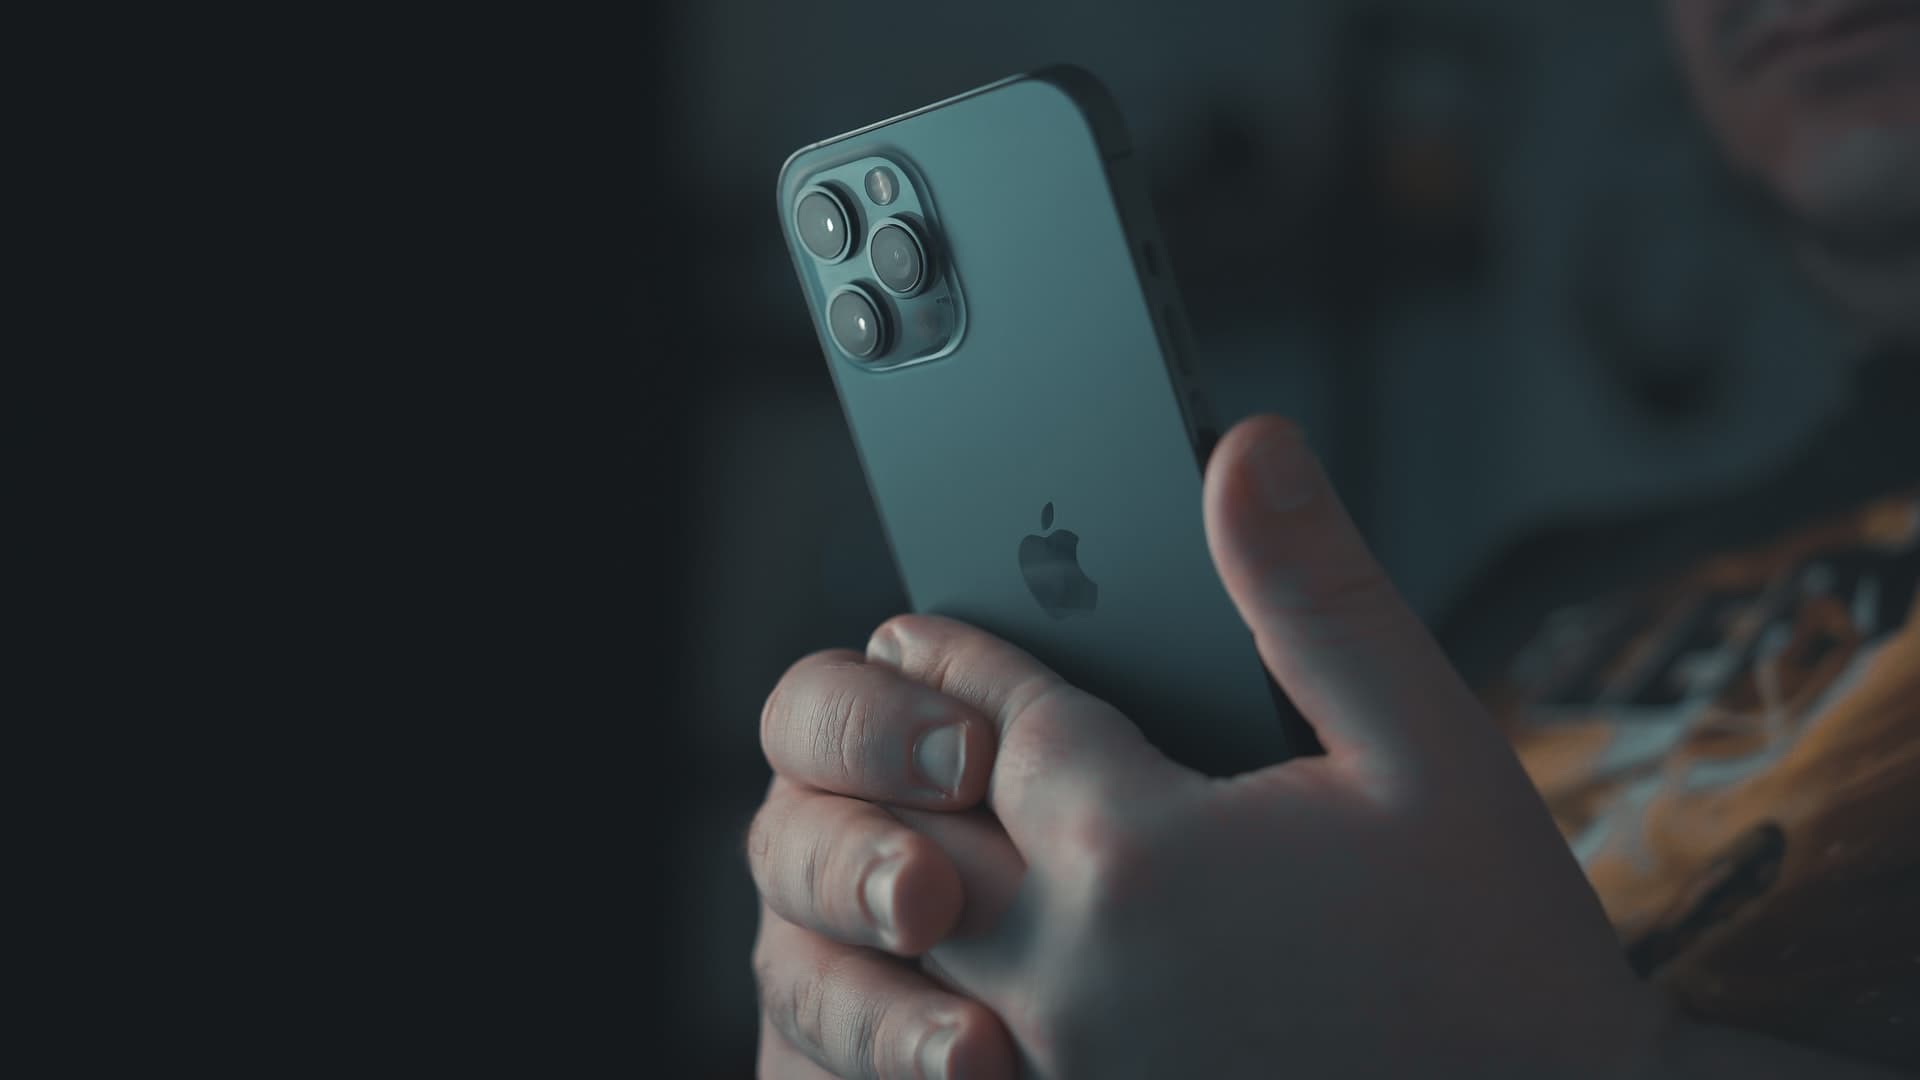 Holding iPhone in hands to show as if the person is recording a video